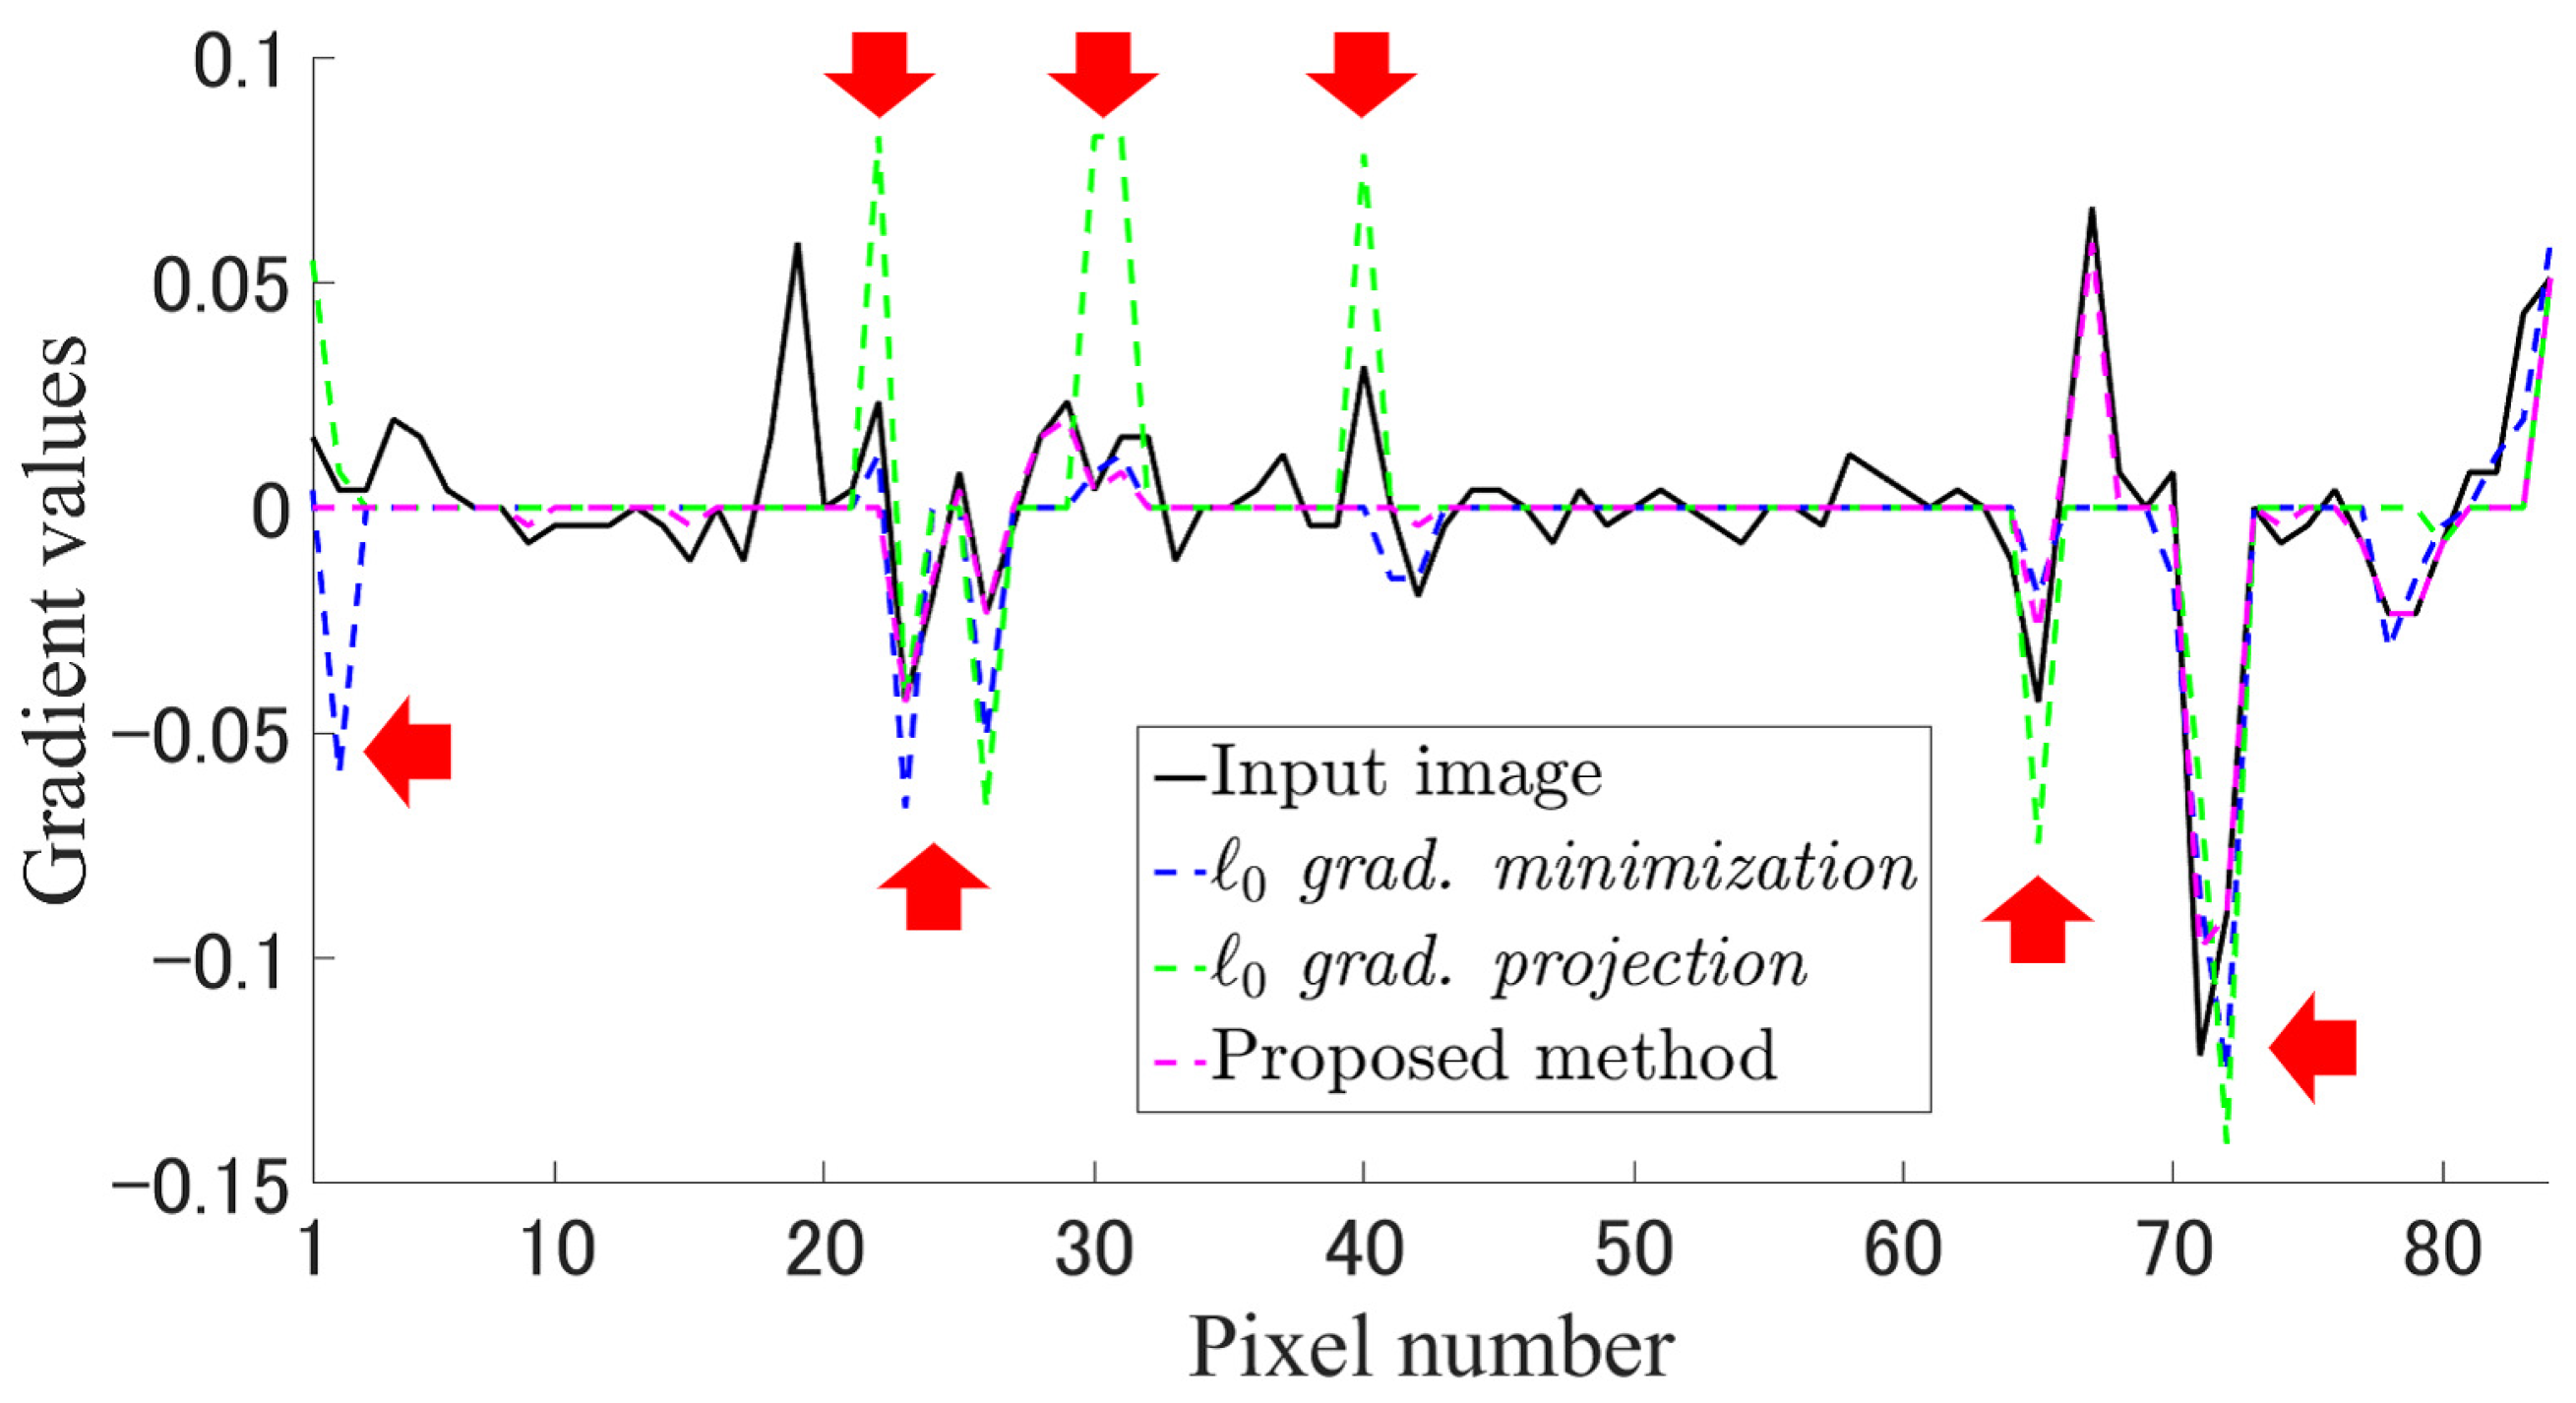 Edge-preserving smoothing filter using fast M-estimation method